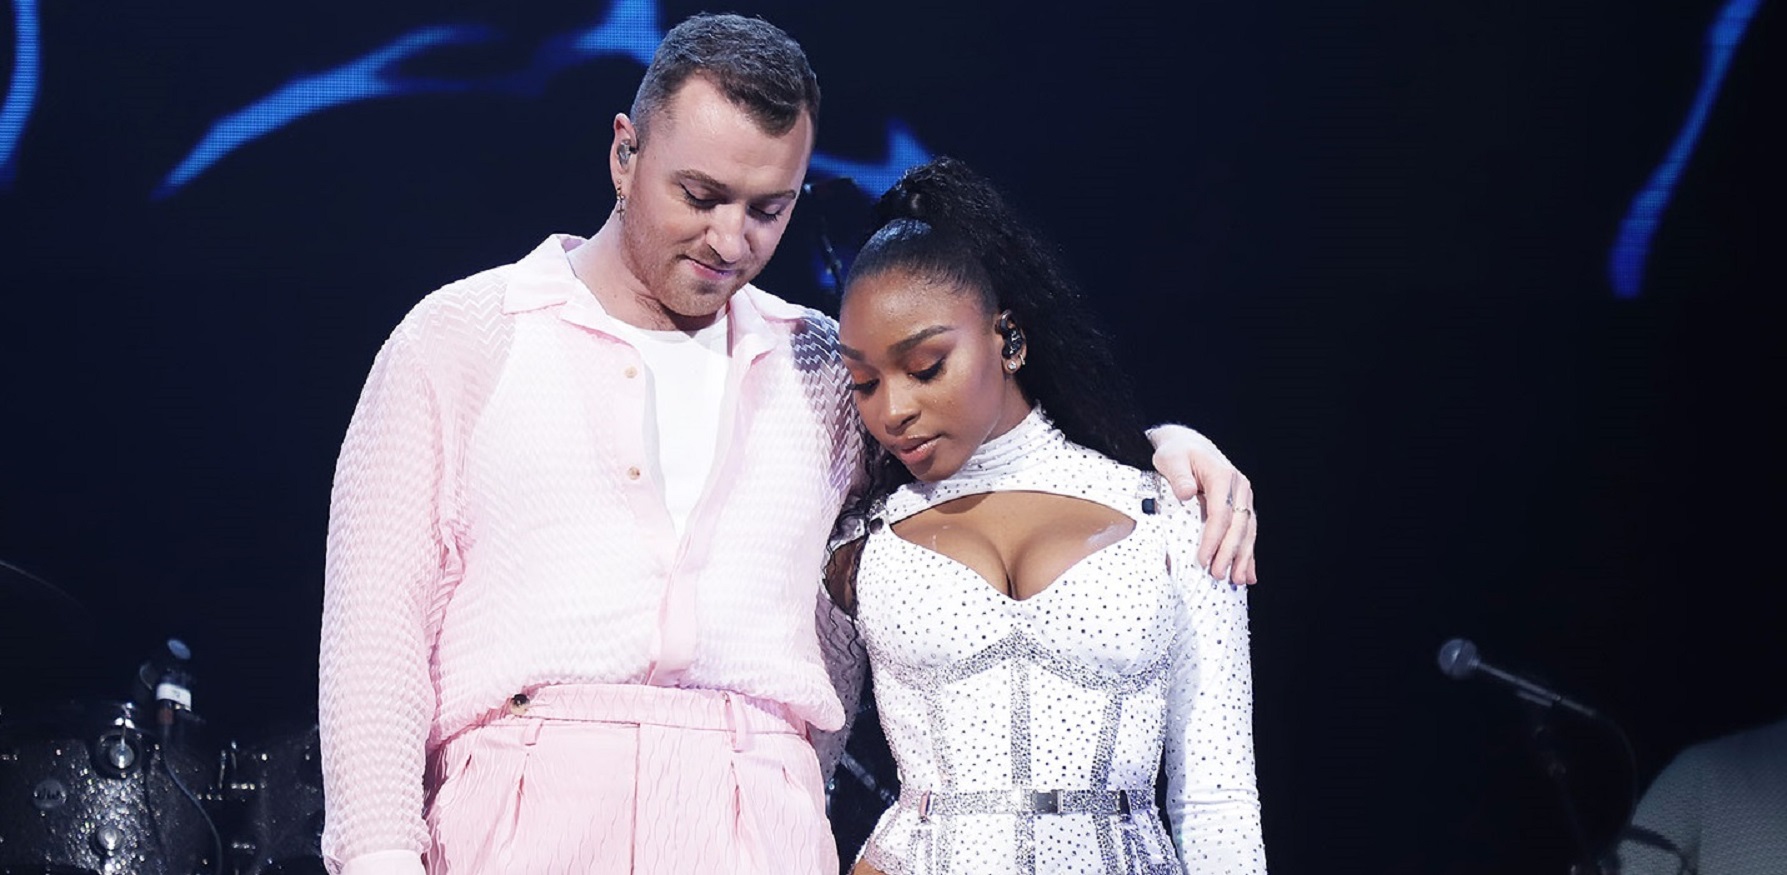 Watch: Sam Smith and Normani Perform Their Duet ‘Dancing With a Stranger’ Live